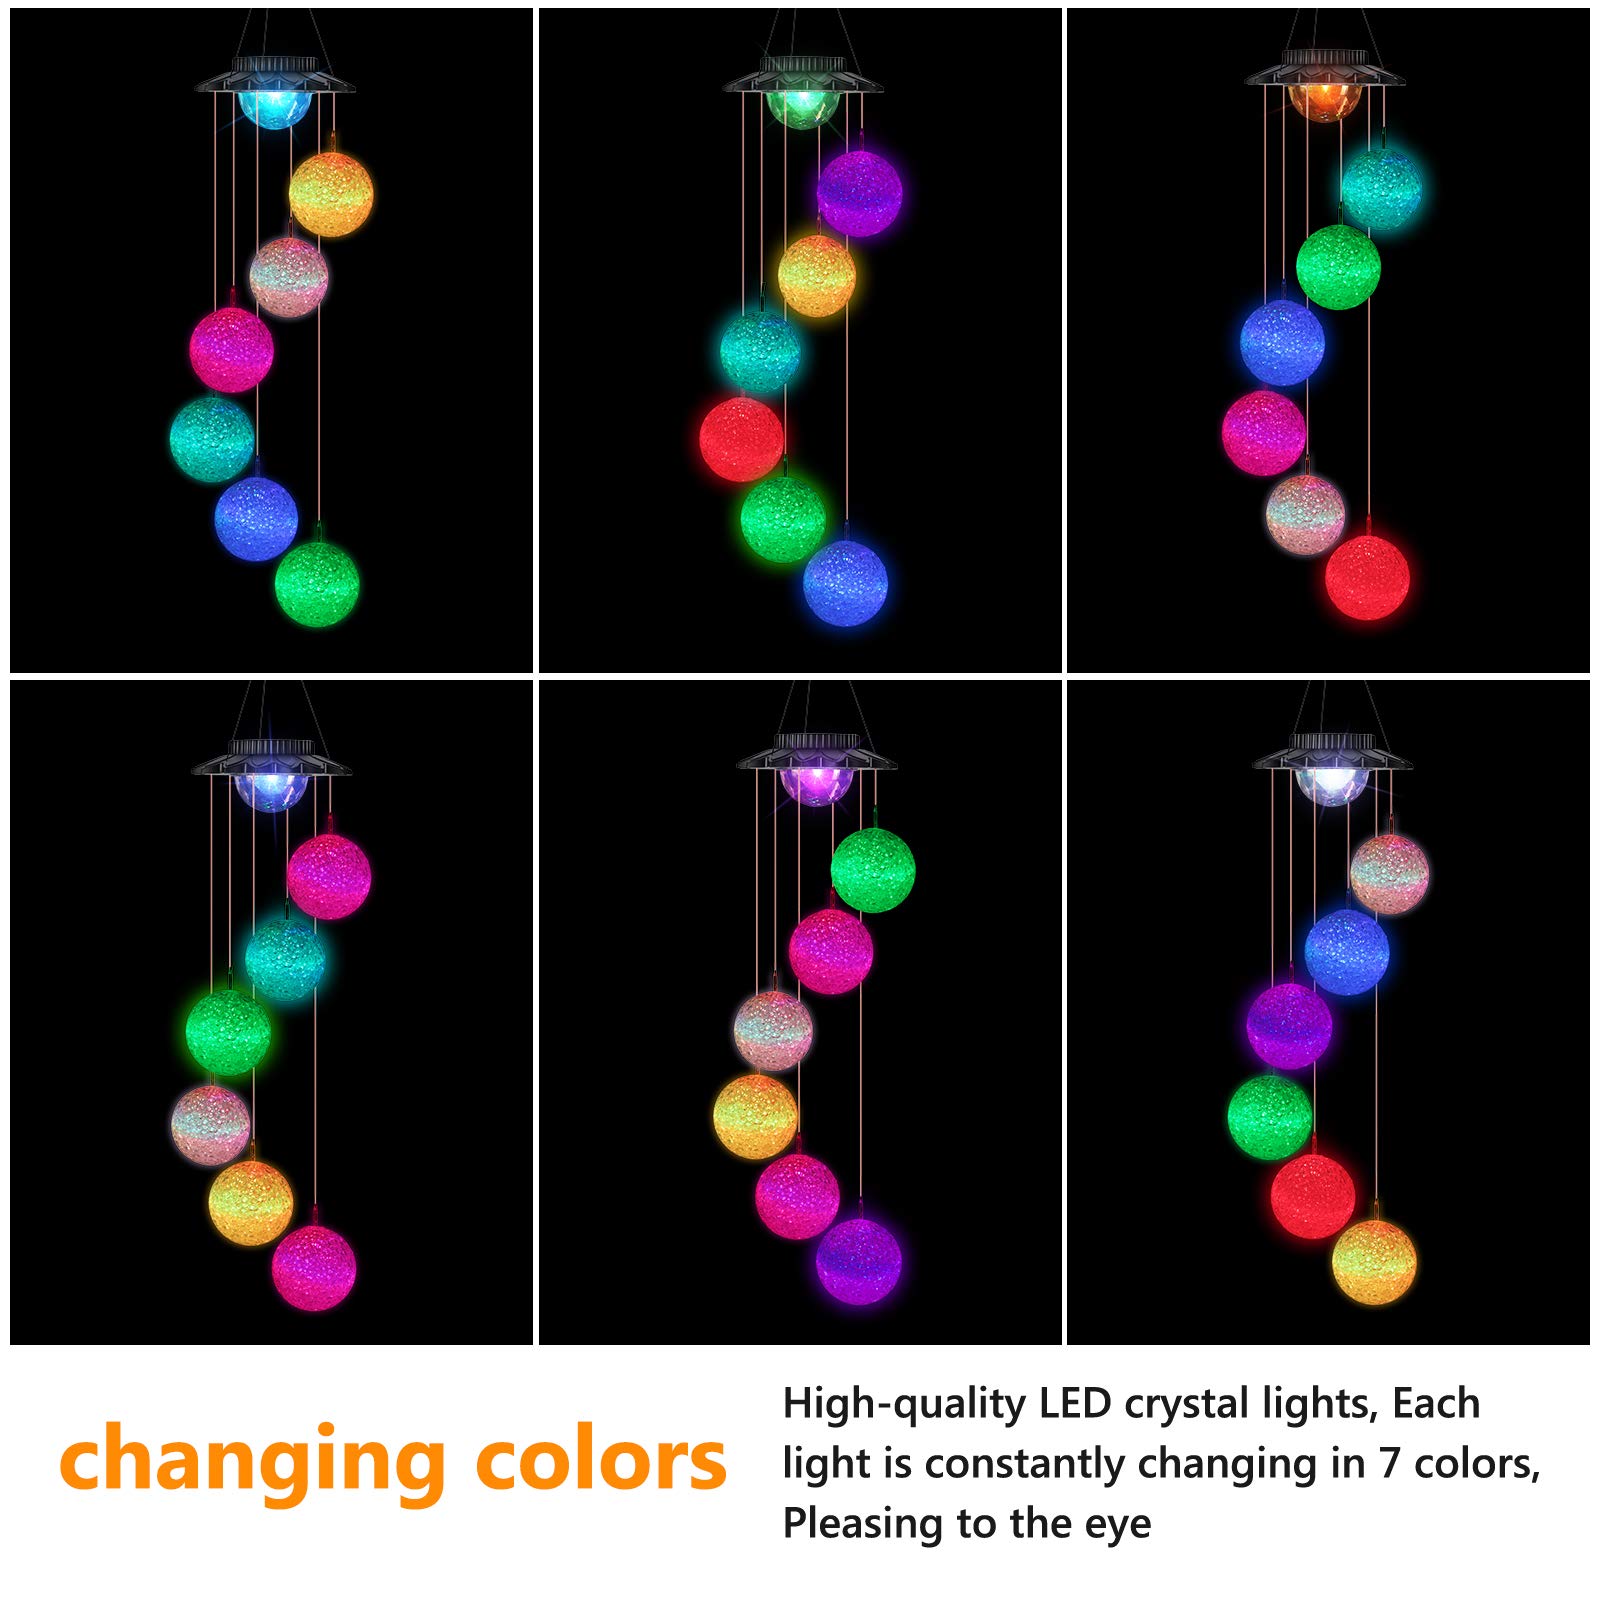 iShabao Solar Wind Chimes, LED Ball Color Changing Outdoor Indoor Waterproof Mobile Decorative Outdoor Hanging Solar Lights for Home Patio Yard Garden Decor Birthday Great Gifts